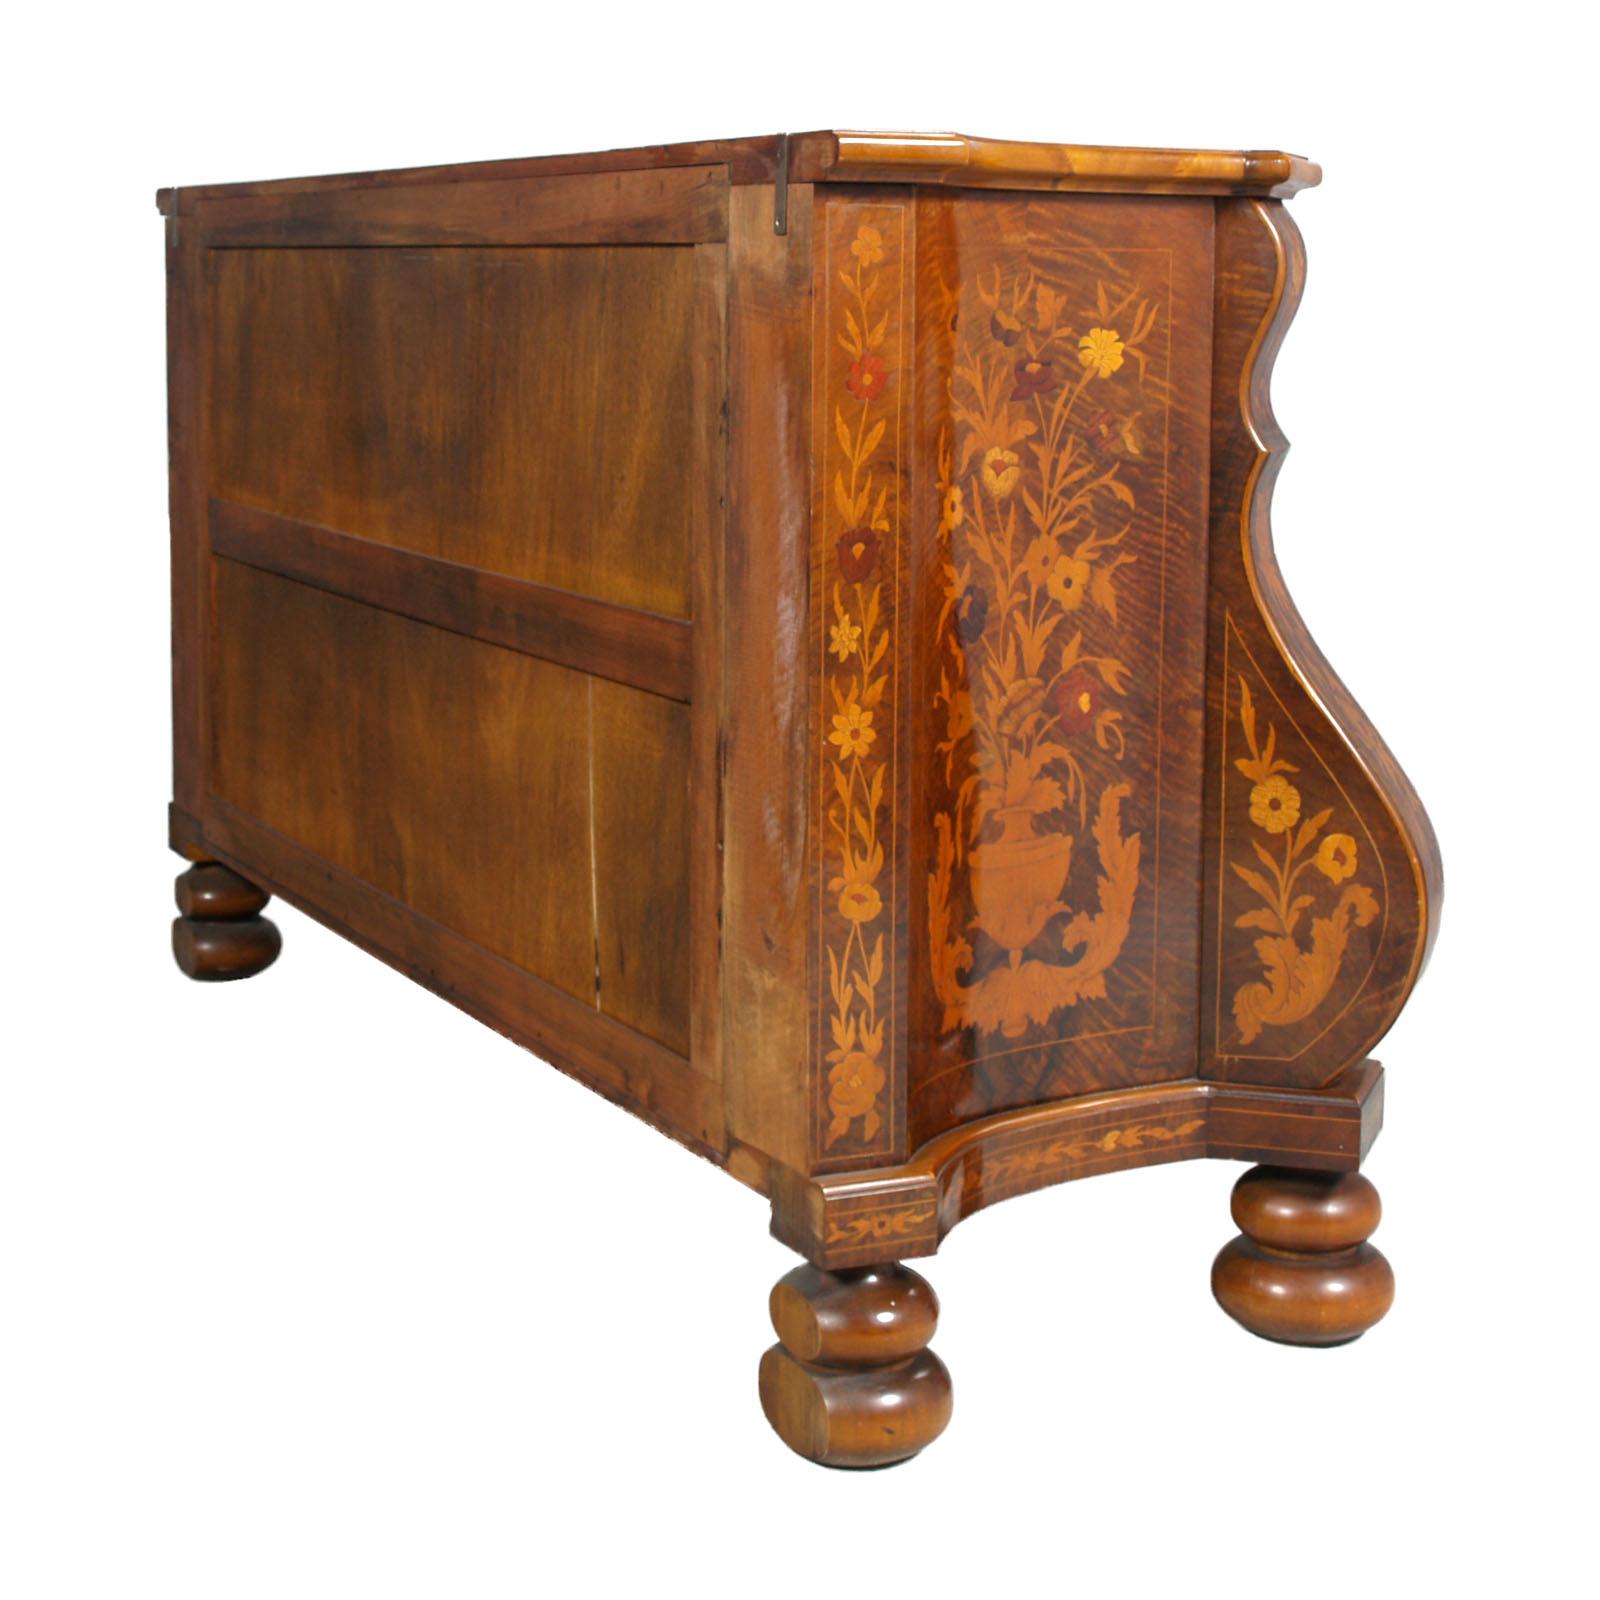 1950s Venetian Walnut Baroque Sideboard and Display Cabinet Richly Floral Inlaid For Sale 7